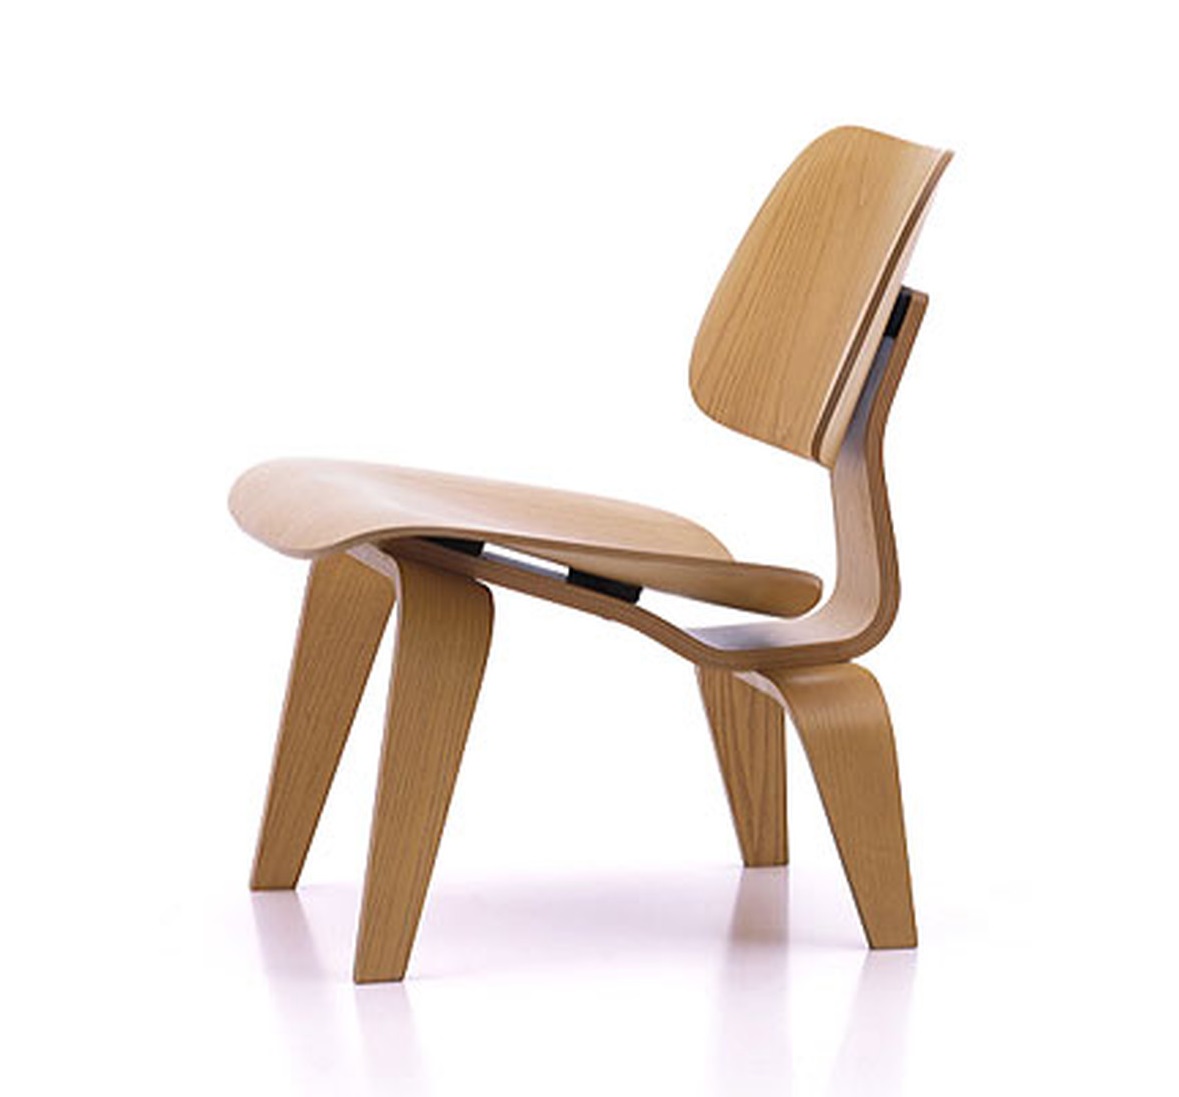 LCW CHAIR Designed by Charles & Ray Eames, 1946 610 x 560 x 705 mm Plywood Price: 2.770.000 VND